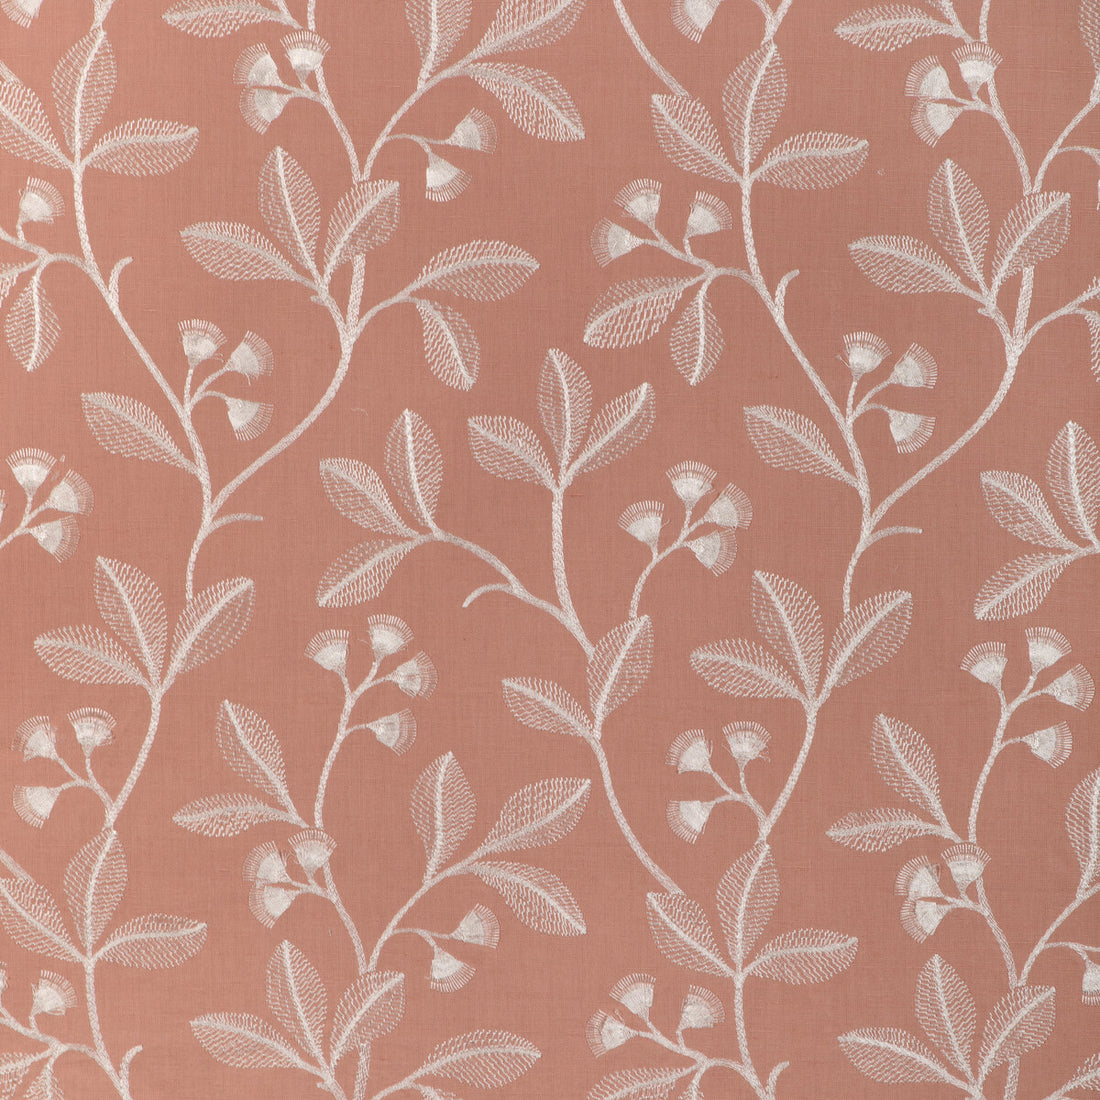 Iris Embroidery fabric in petal color - pattern 2023144.7.0 - by Lee Jofa in the Garden Walk collection